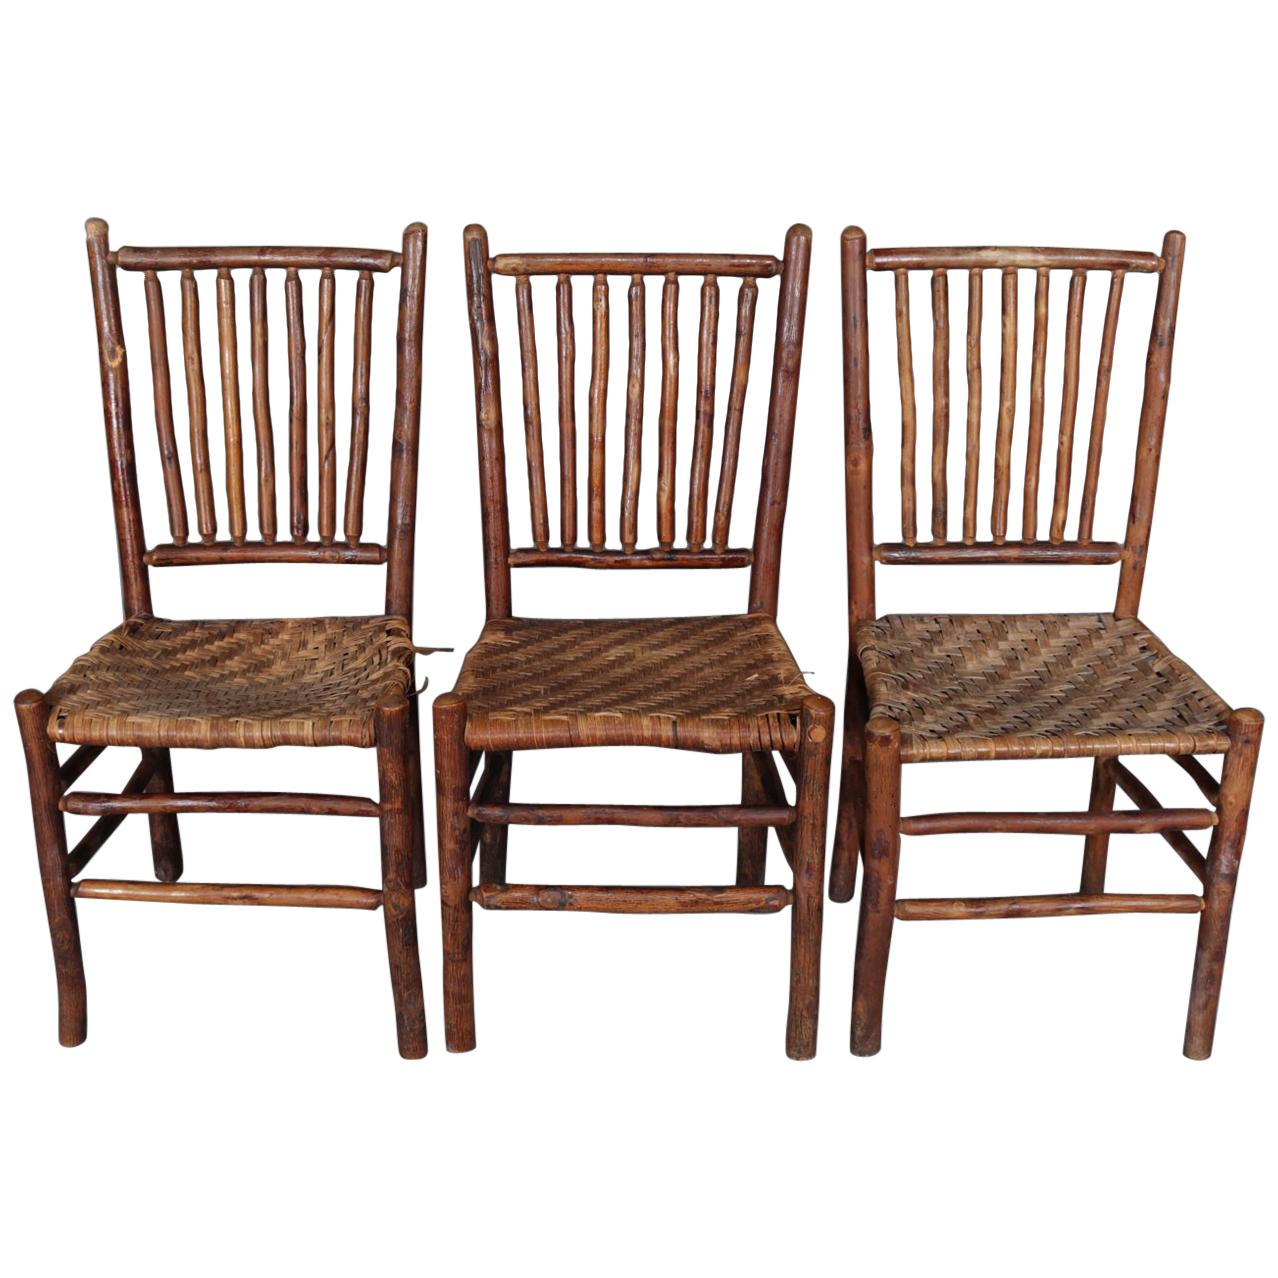 Antique Hand Carved Old Hickory Adirondack Branch & Rush Side Chairs, circa 1900